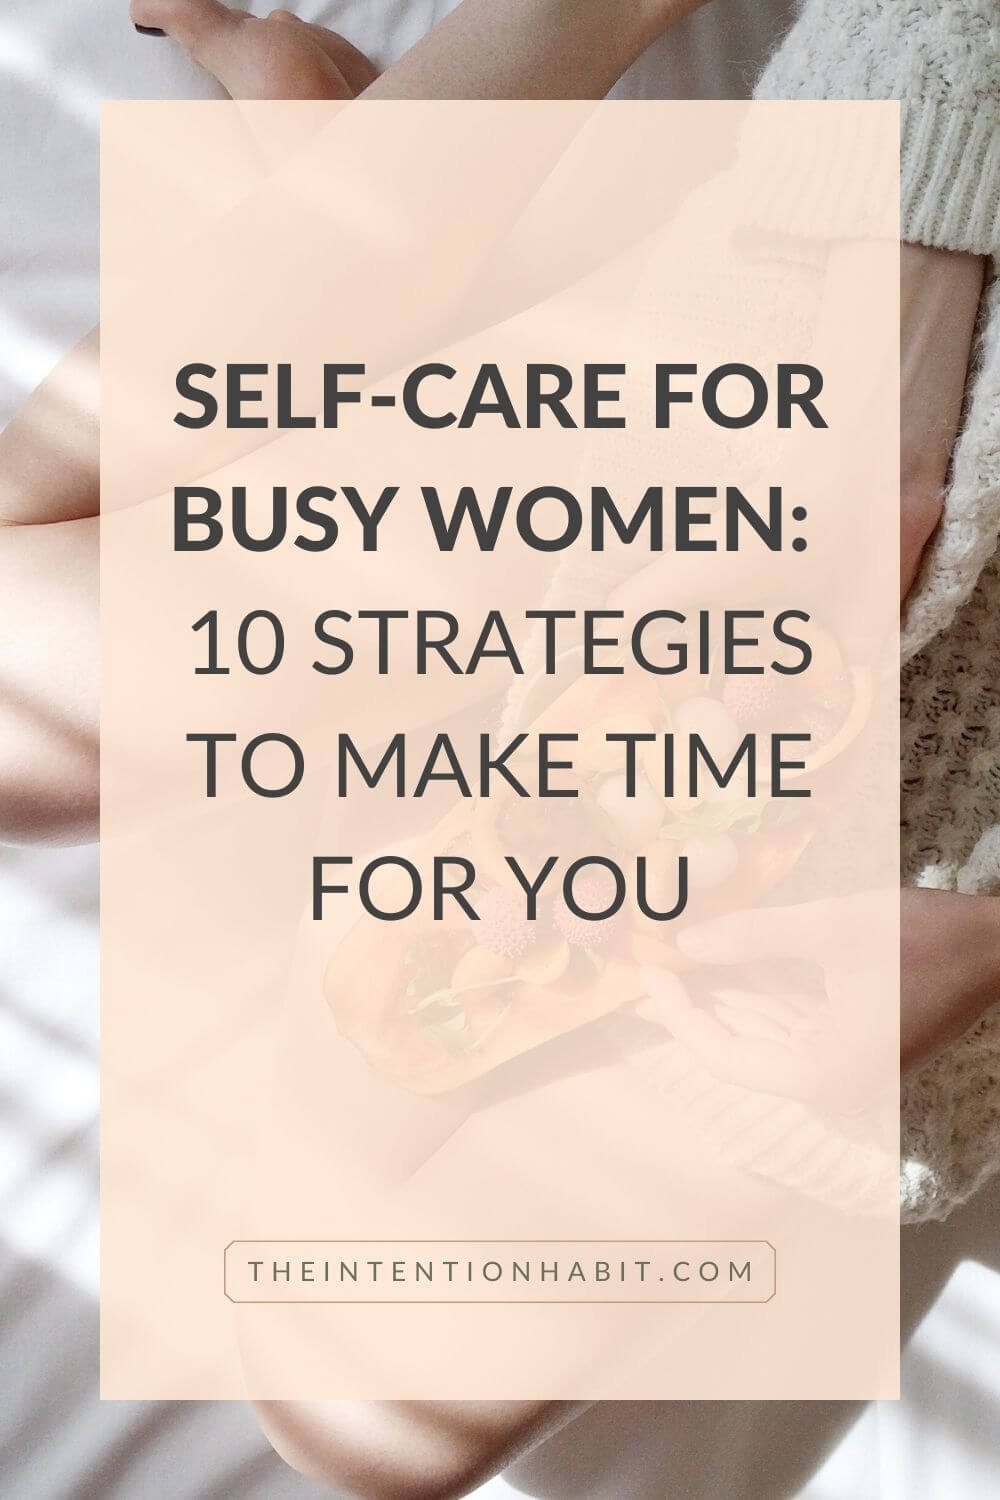 self-care for busy women: 10 strategies to make time for you